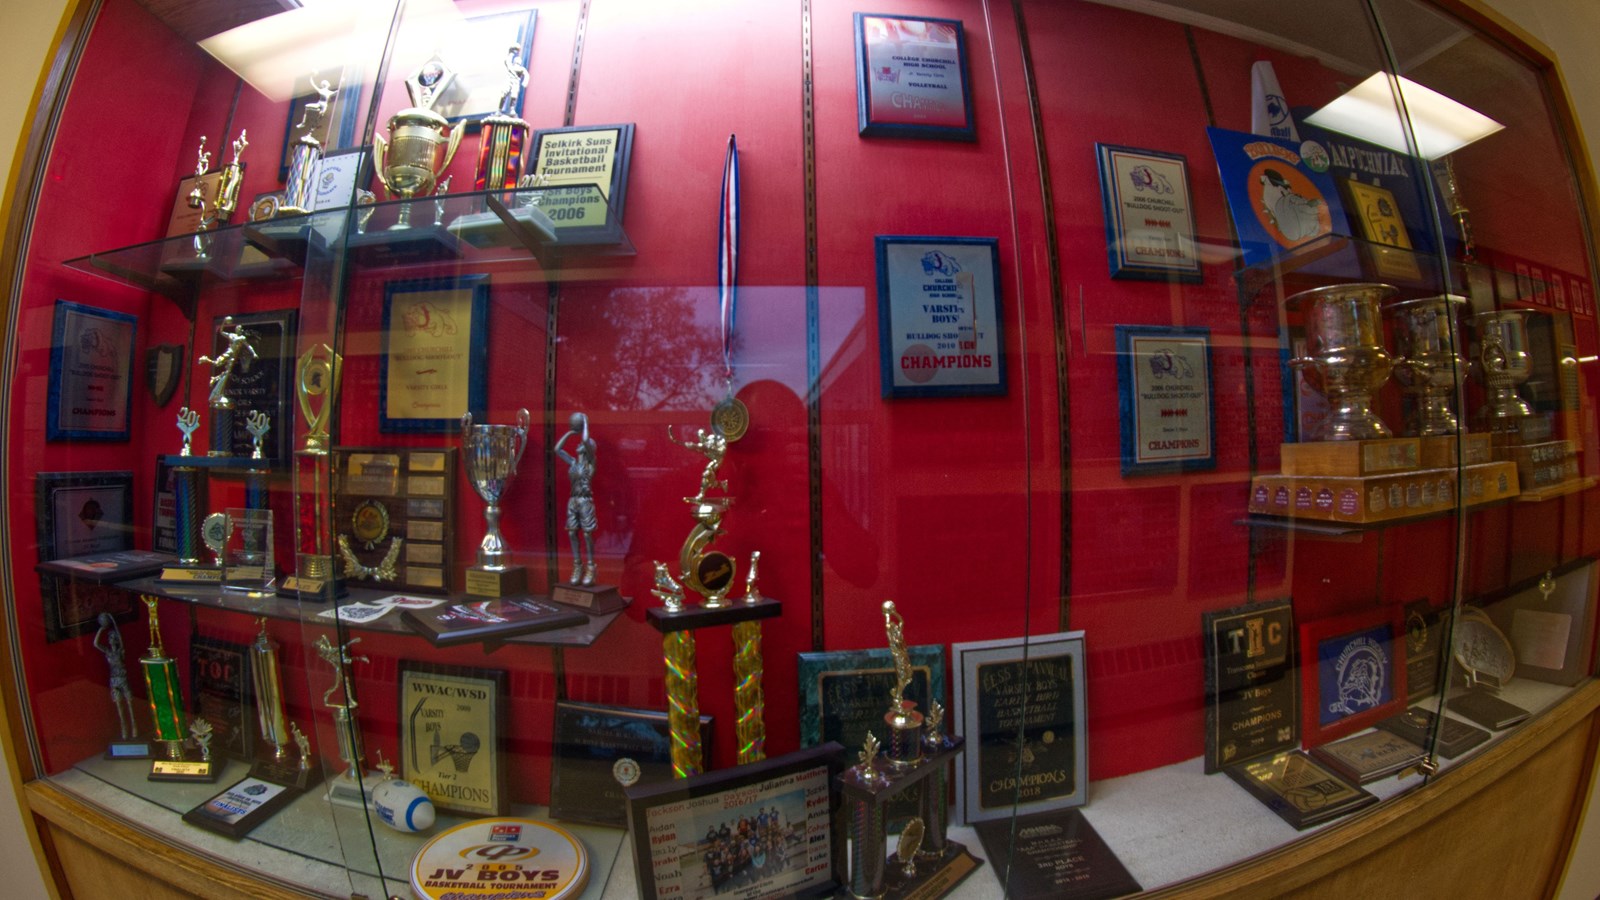 High school trophy cases in Jackson area full of championships and